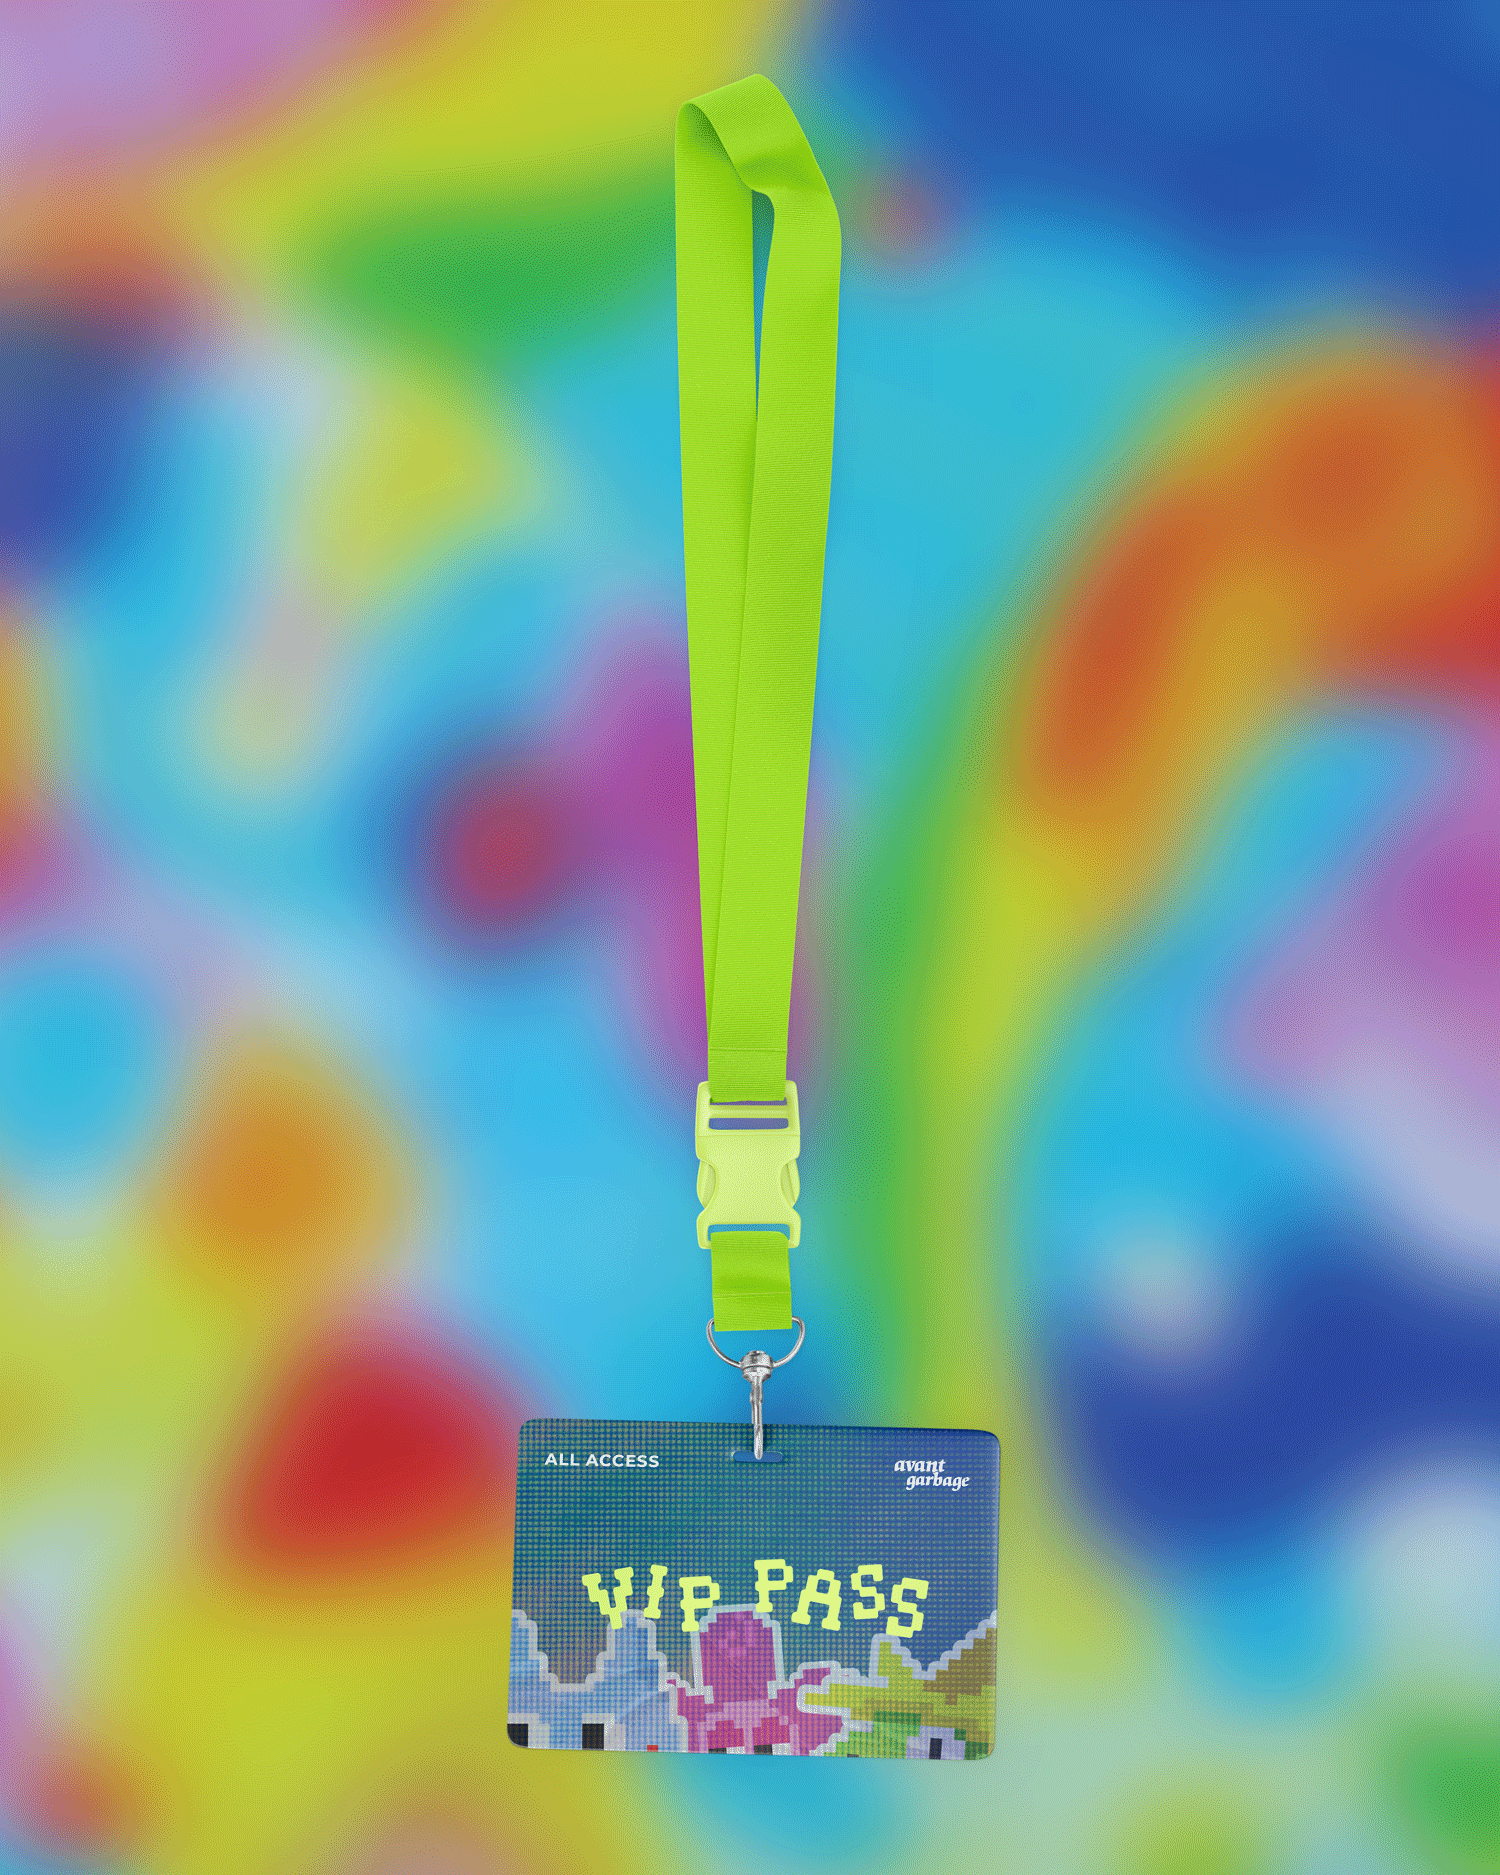 Mockup of lanyard with a VIP pass that has glow in the dark text.